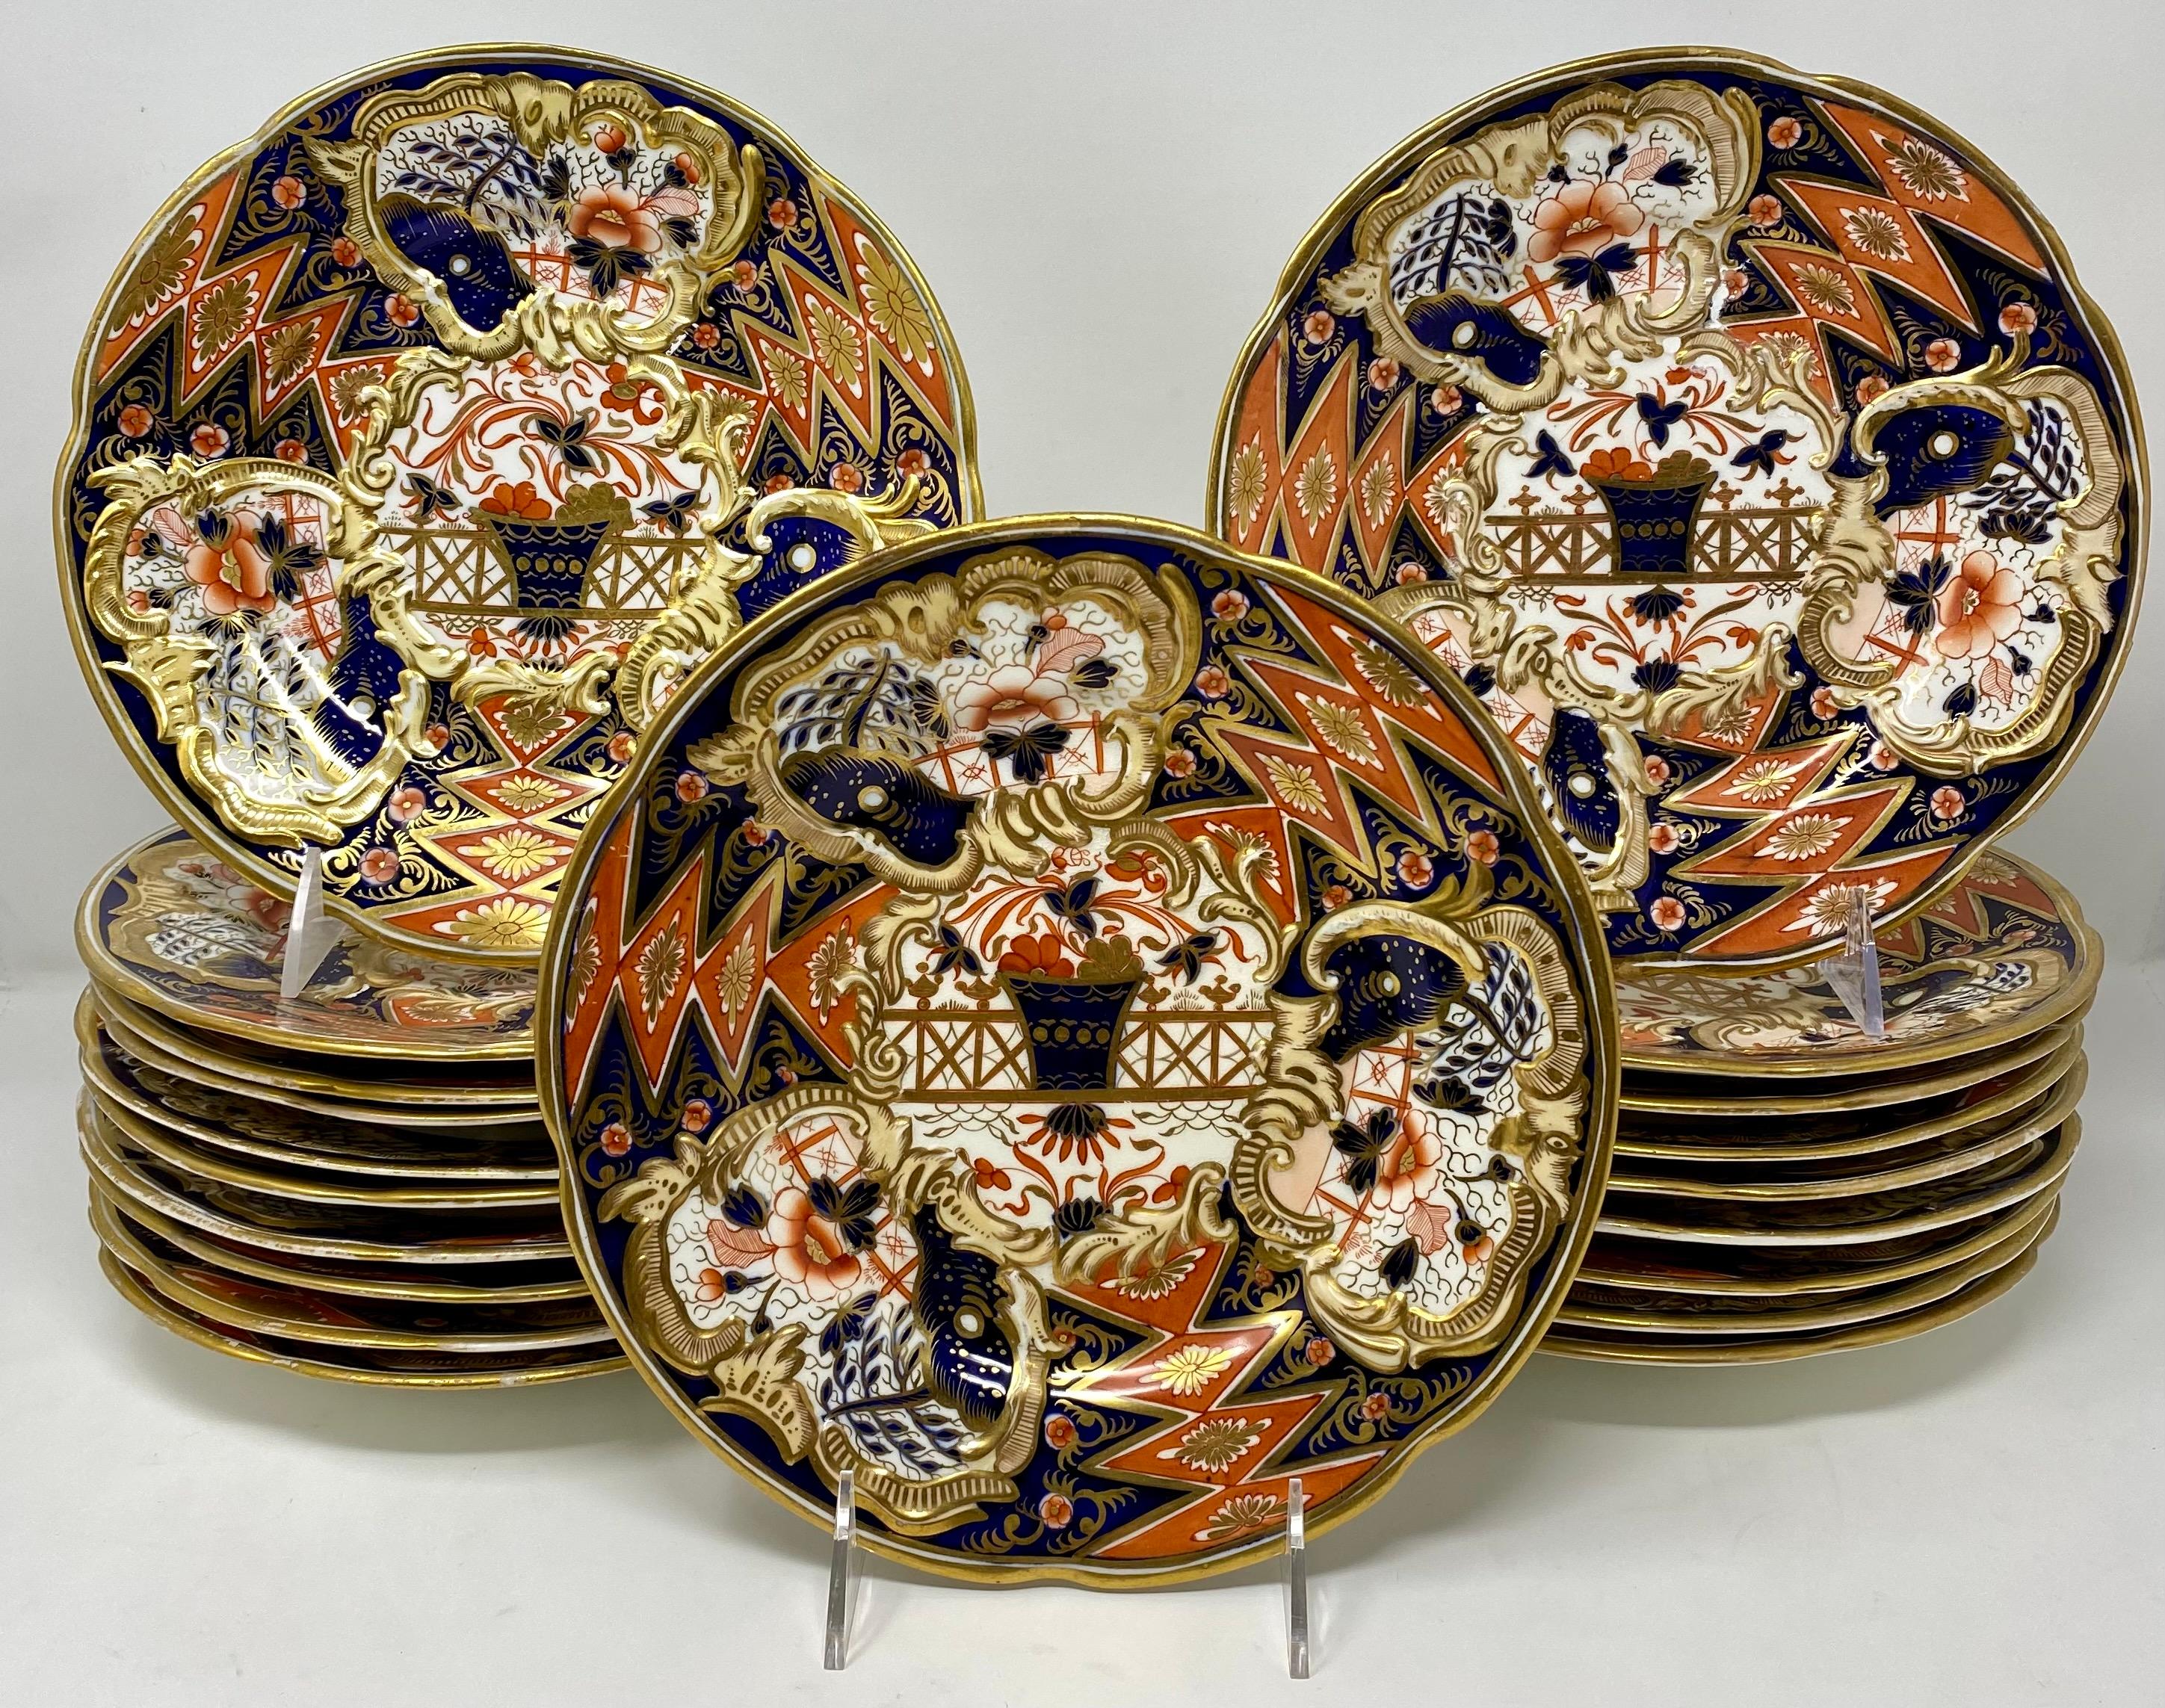 Finest quality antique English early Georgian Coalport Porcelain 29 piece dessert service with compotes and serving pieces, circa 1810-1820. These pieces are all in pristine condition for their age.
20 round plates: 9 